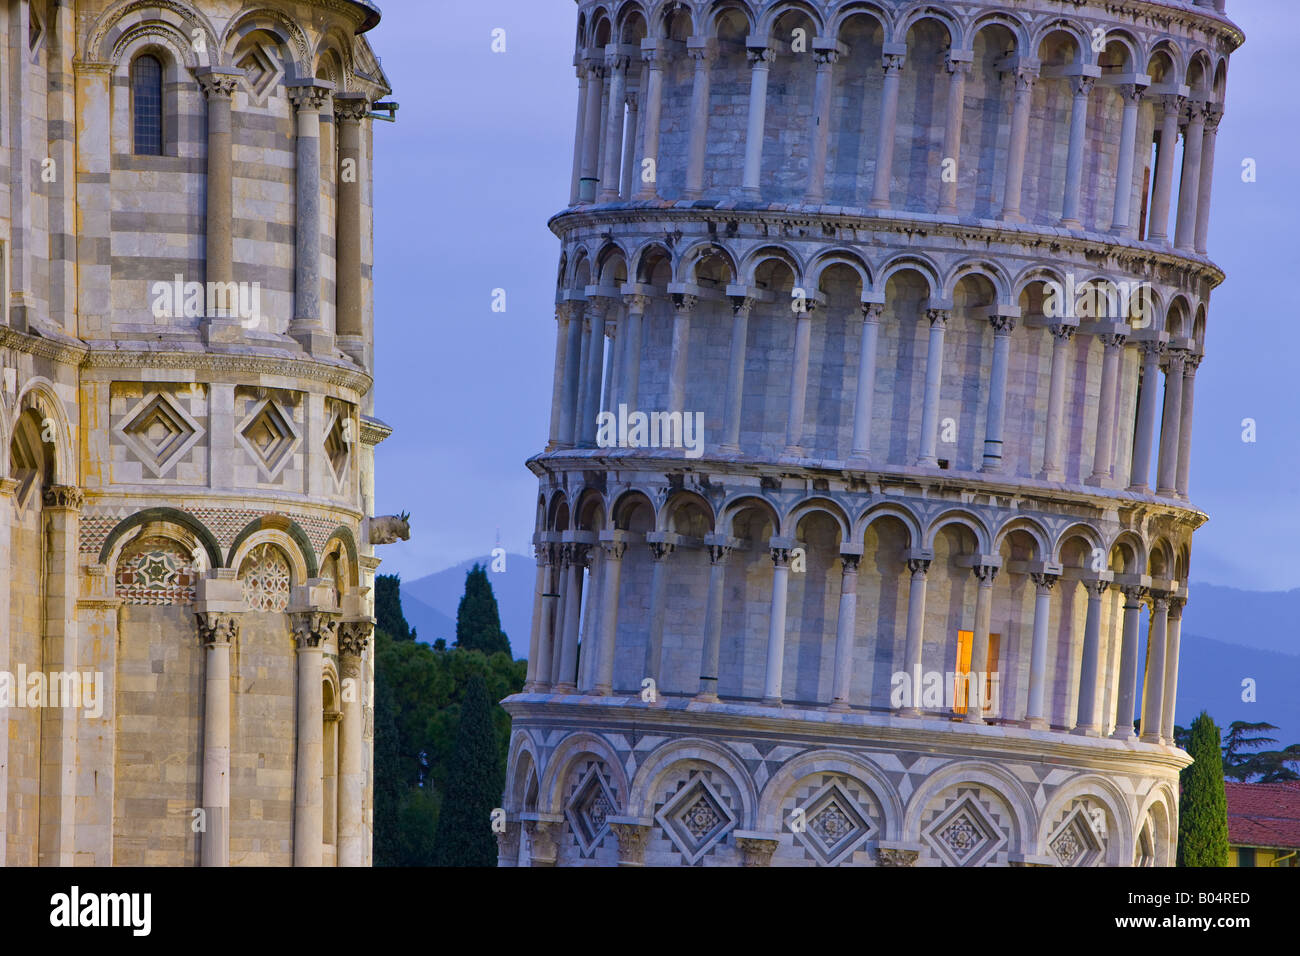 The base of the famous leaning tower of Pisa and Pisa Duomo at dusk in Piazza del Duomo (Campo dei Miracoli) Stock Photo